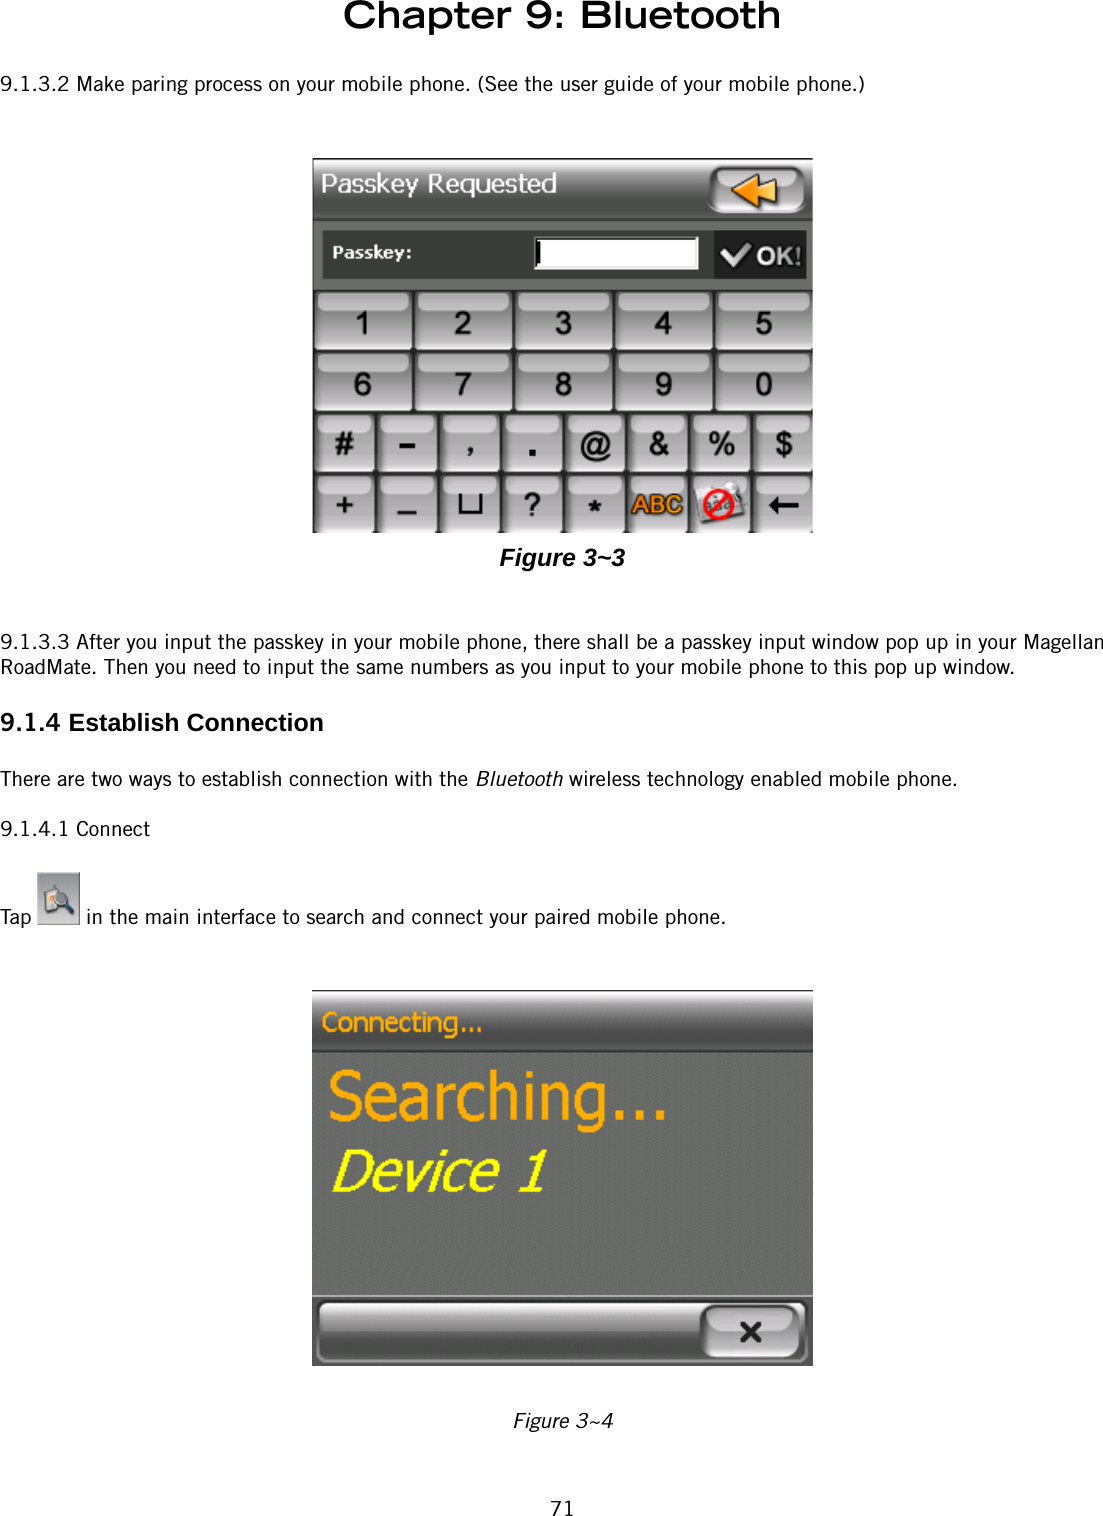 Chapter 9: Bluetooth719.1.3.2 Make paring process on your mobile phone. (See the user guide of your mobile phone.)Figure 3~39.1.3.3 After you input the passkey in your mobile phone, there shall be a passkey input window pop up in your Magellan RoadMate. Then you need to input the same numbers as you input to your mobile phone to this pop up window.9.1.4 Establish ConnectionThere are two ways to establish connection with the Bluetooth wireless technology enabled mobile phone.9.1.4.1 ConnectTap   in the main interface to search and connect your paired mobile phone.Figure 3~4